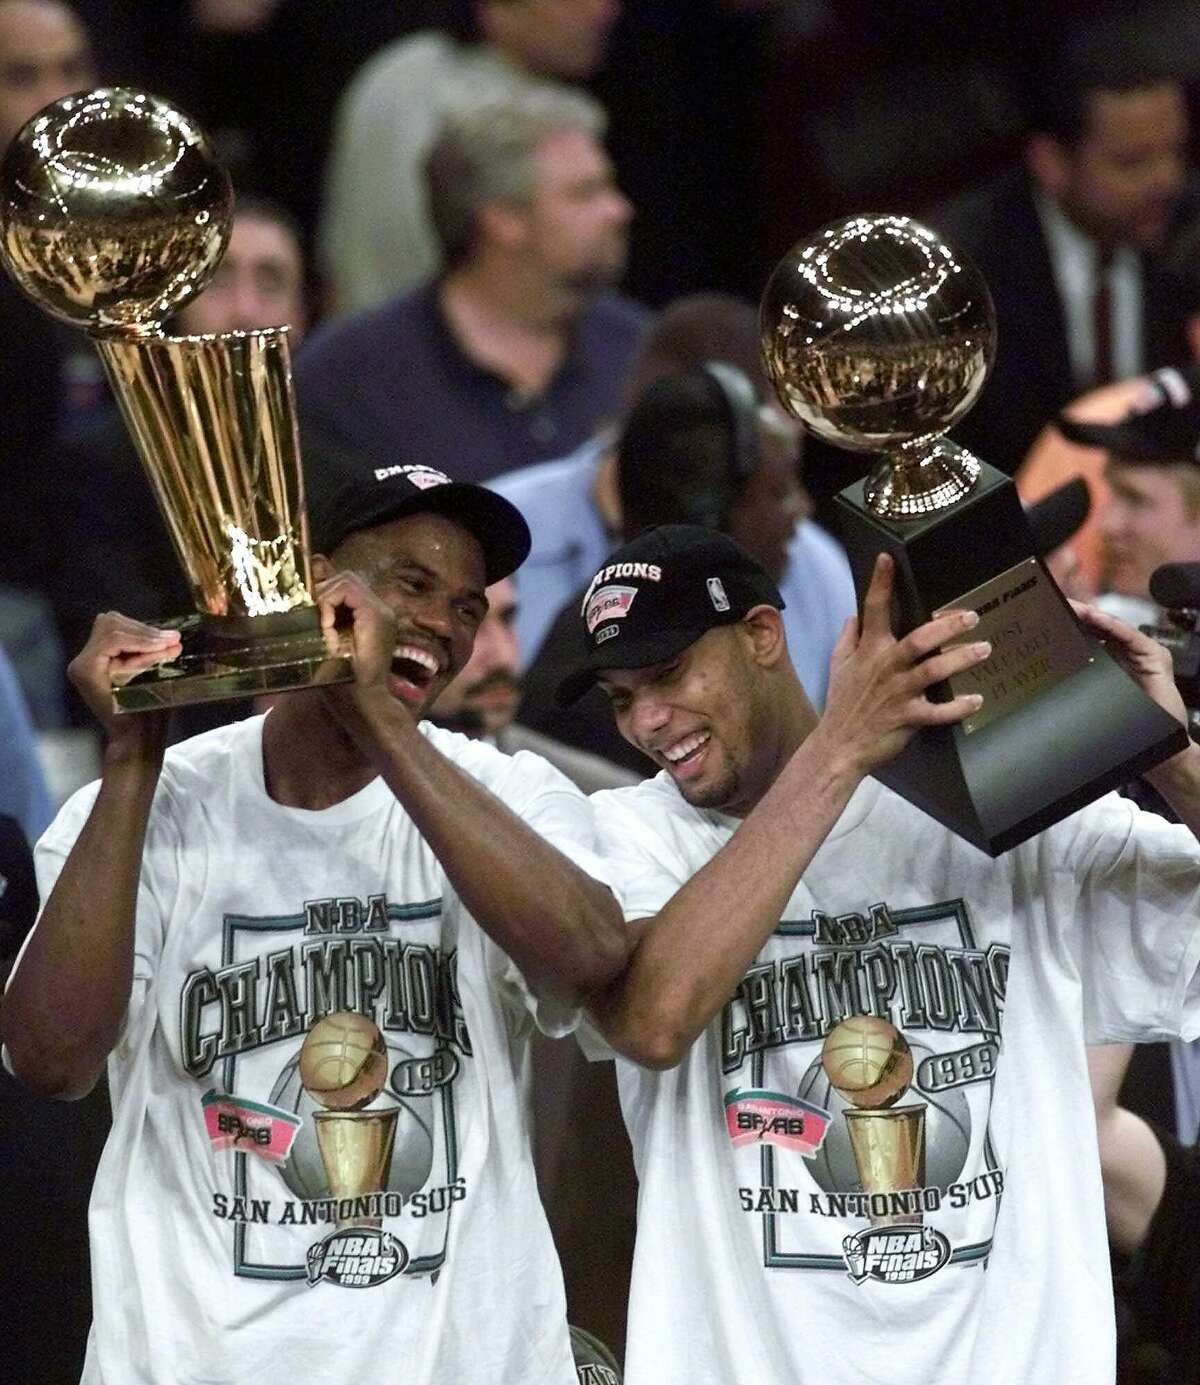 The San Antonio Spurs' David Robinson, left, holds the NBA championship trophy as teammate Tim Duncan holds the Most Valuable Player trophy after defeating the New York Knicks 78-77 in Game 5 of the 1999 NBA Finals on June 25, 1999, at New York's Madison Square Garden.